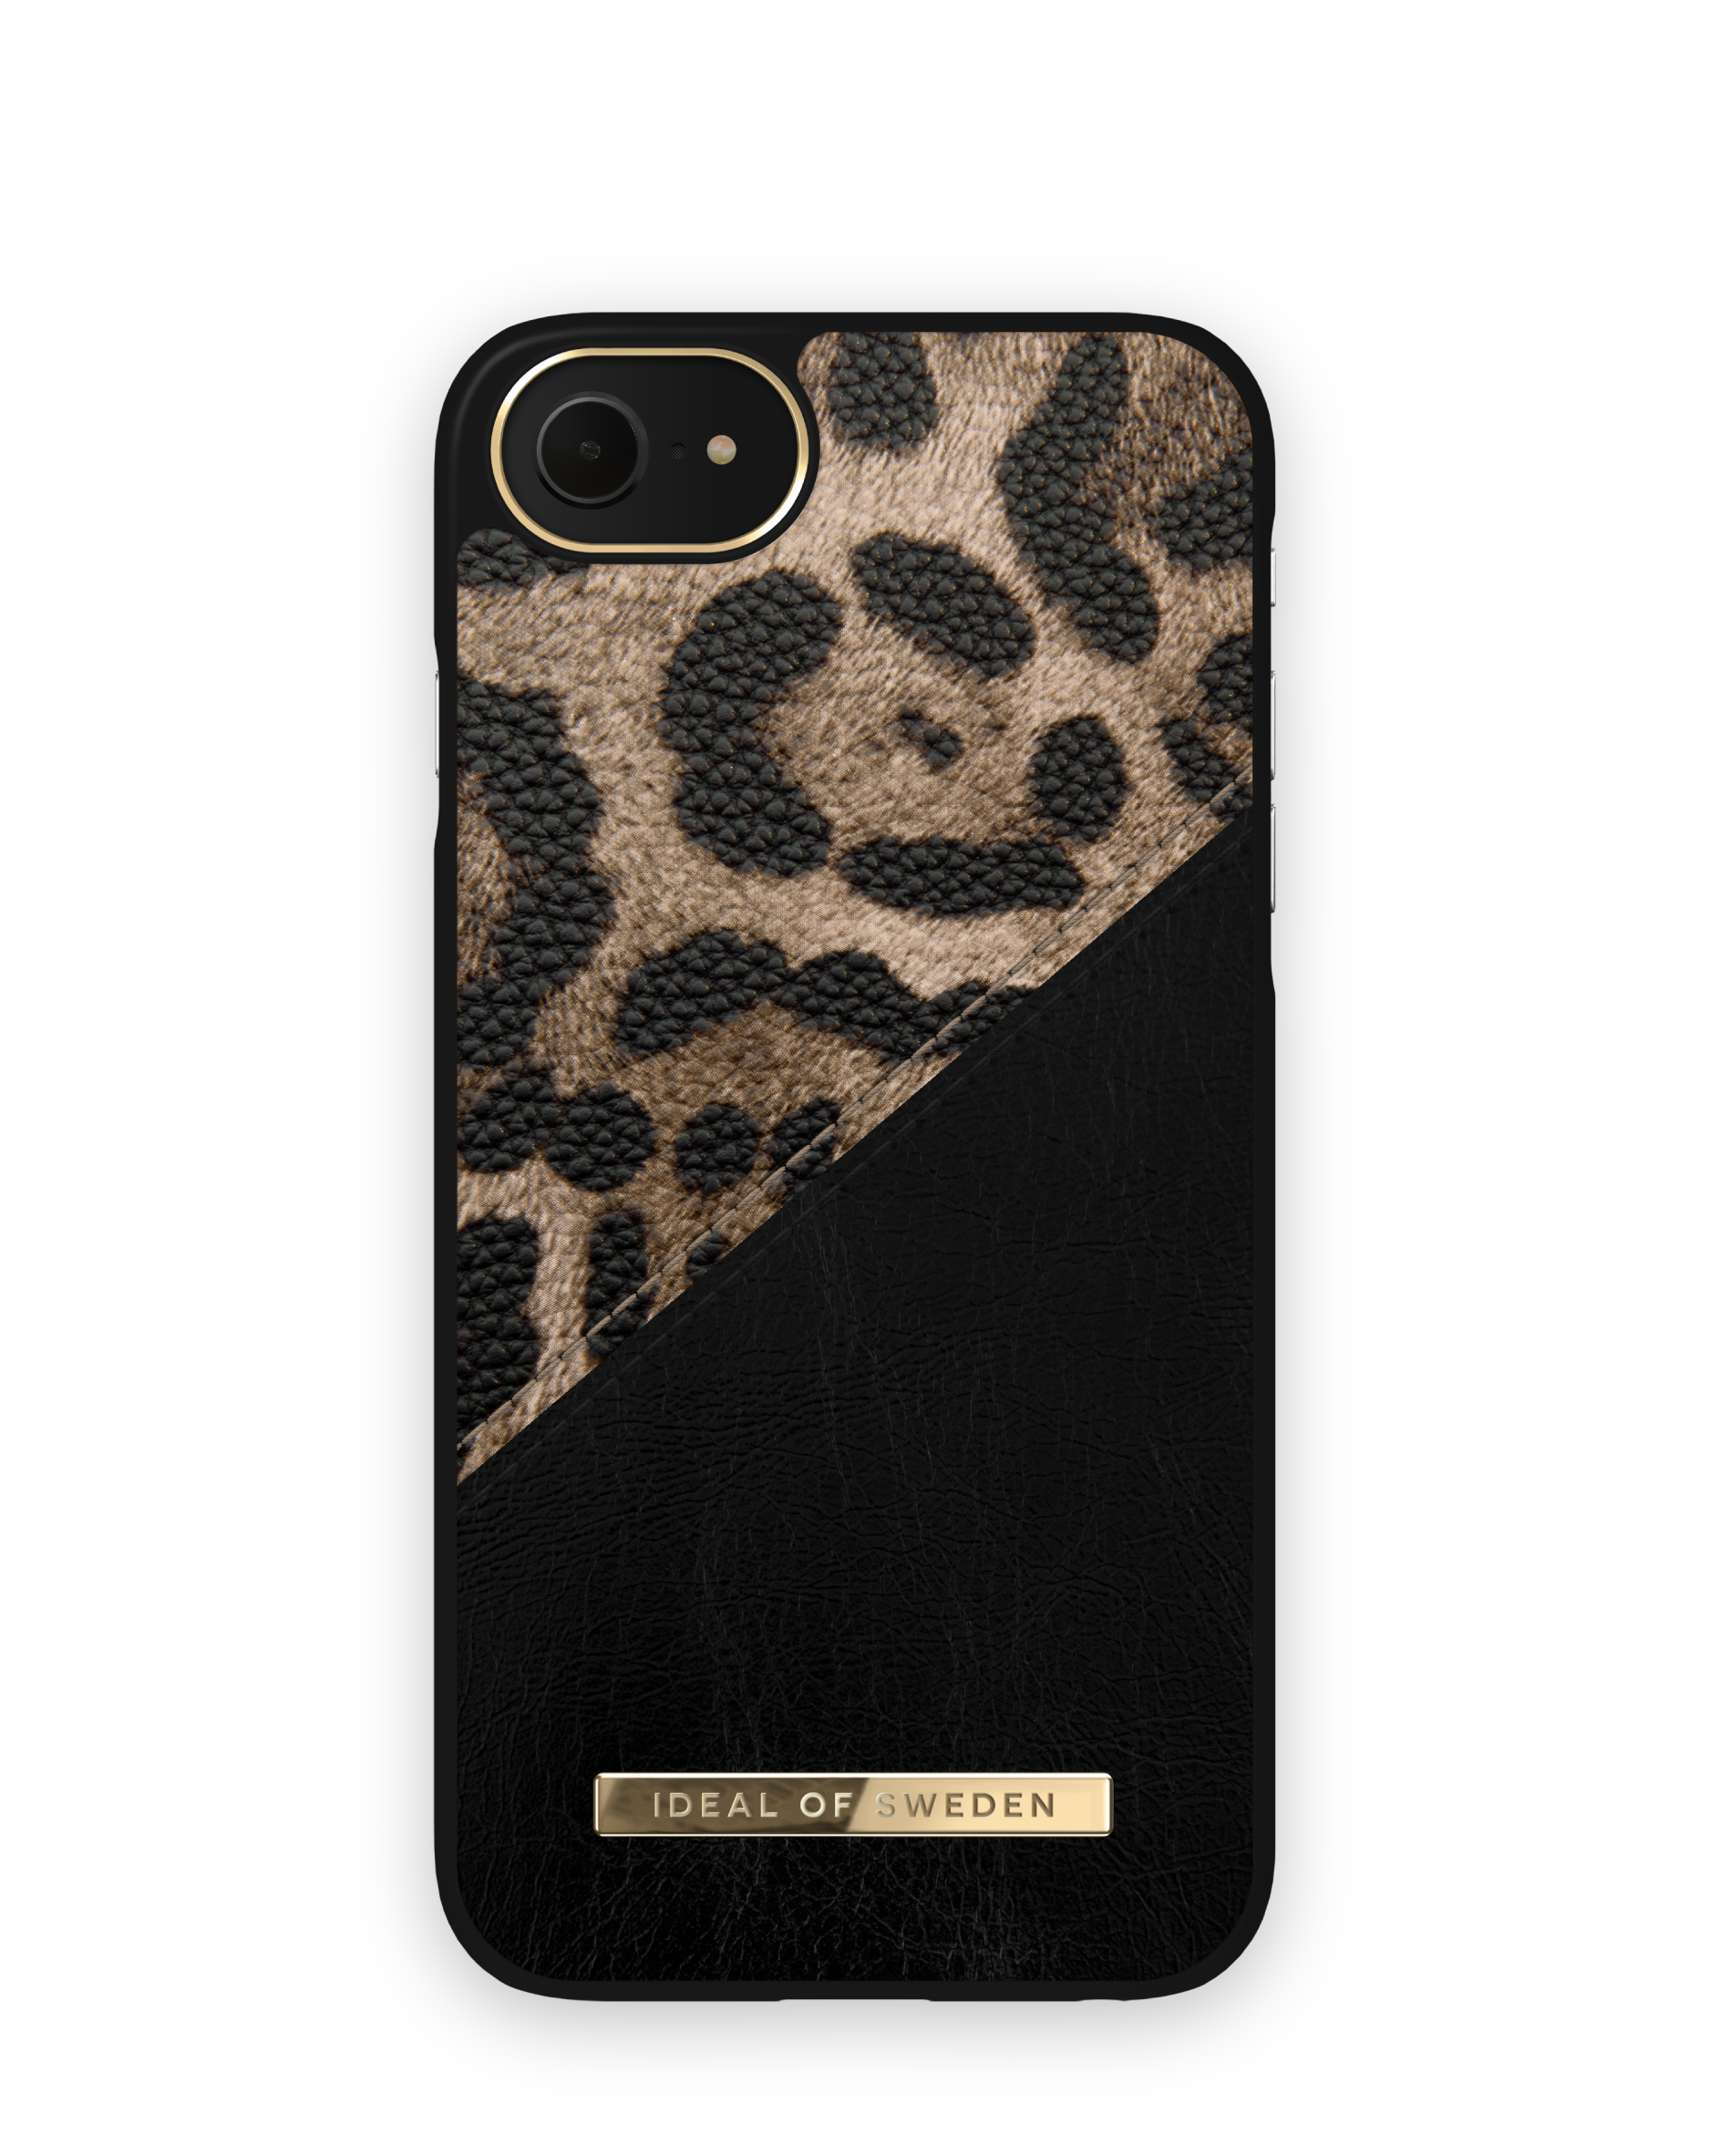 IDACAW21-I7-330, Apple, SWEDEN Midnight IDEAL Backcover, Leopard iPhone OF 8/7/6/6s/SE,